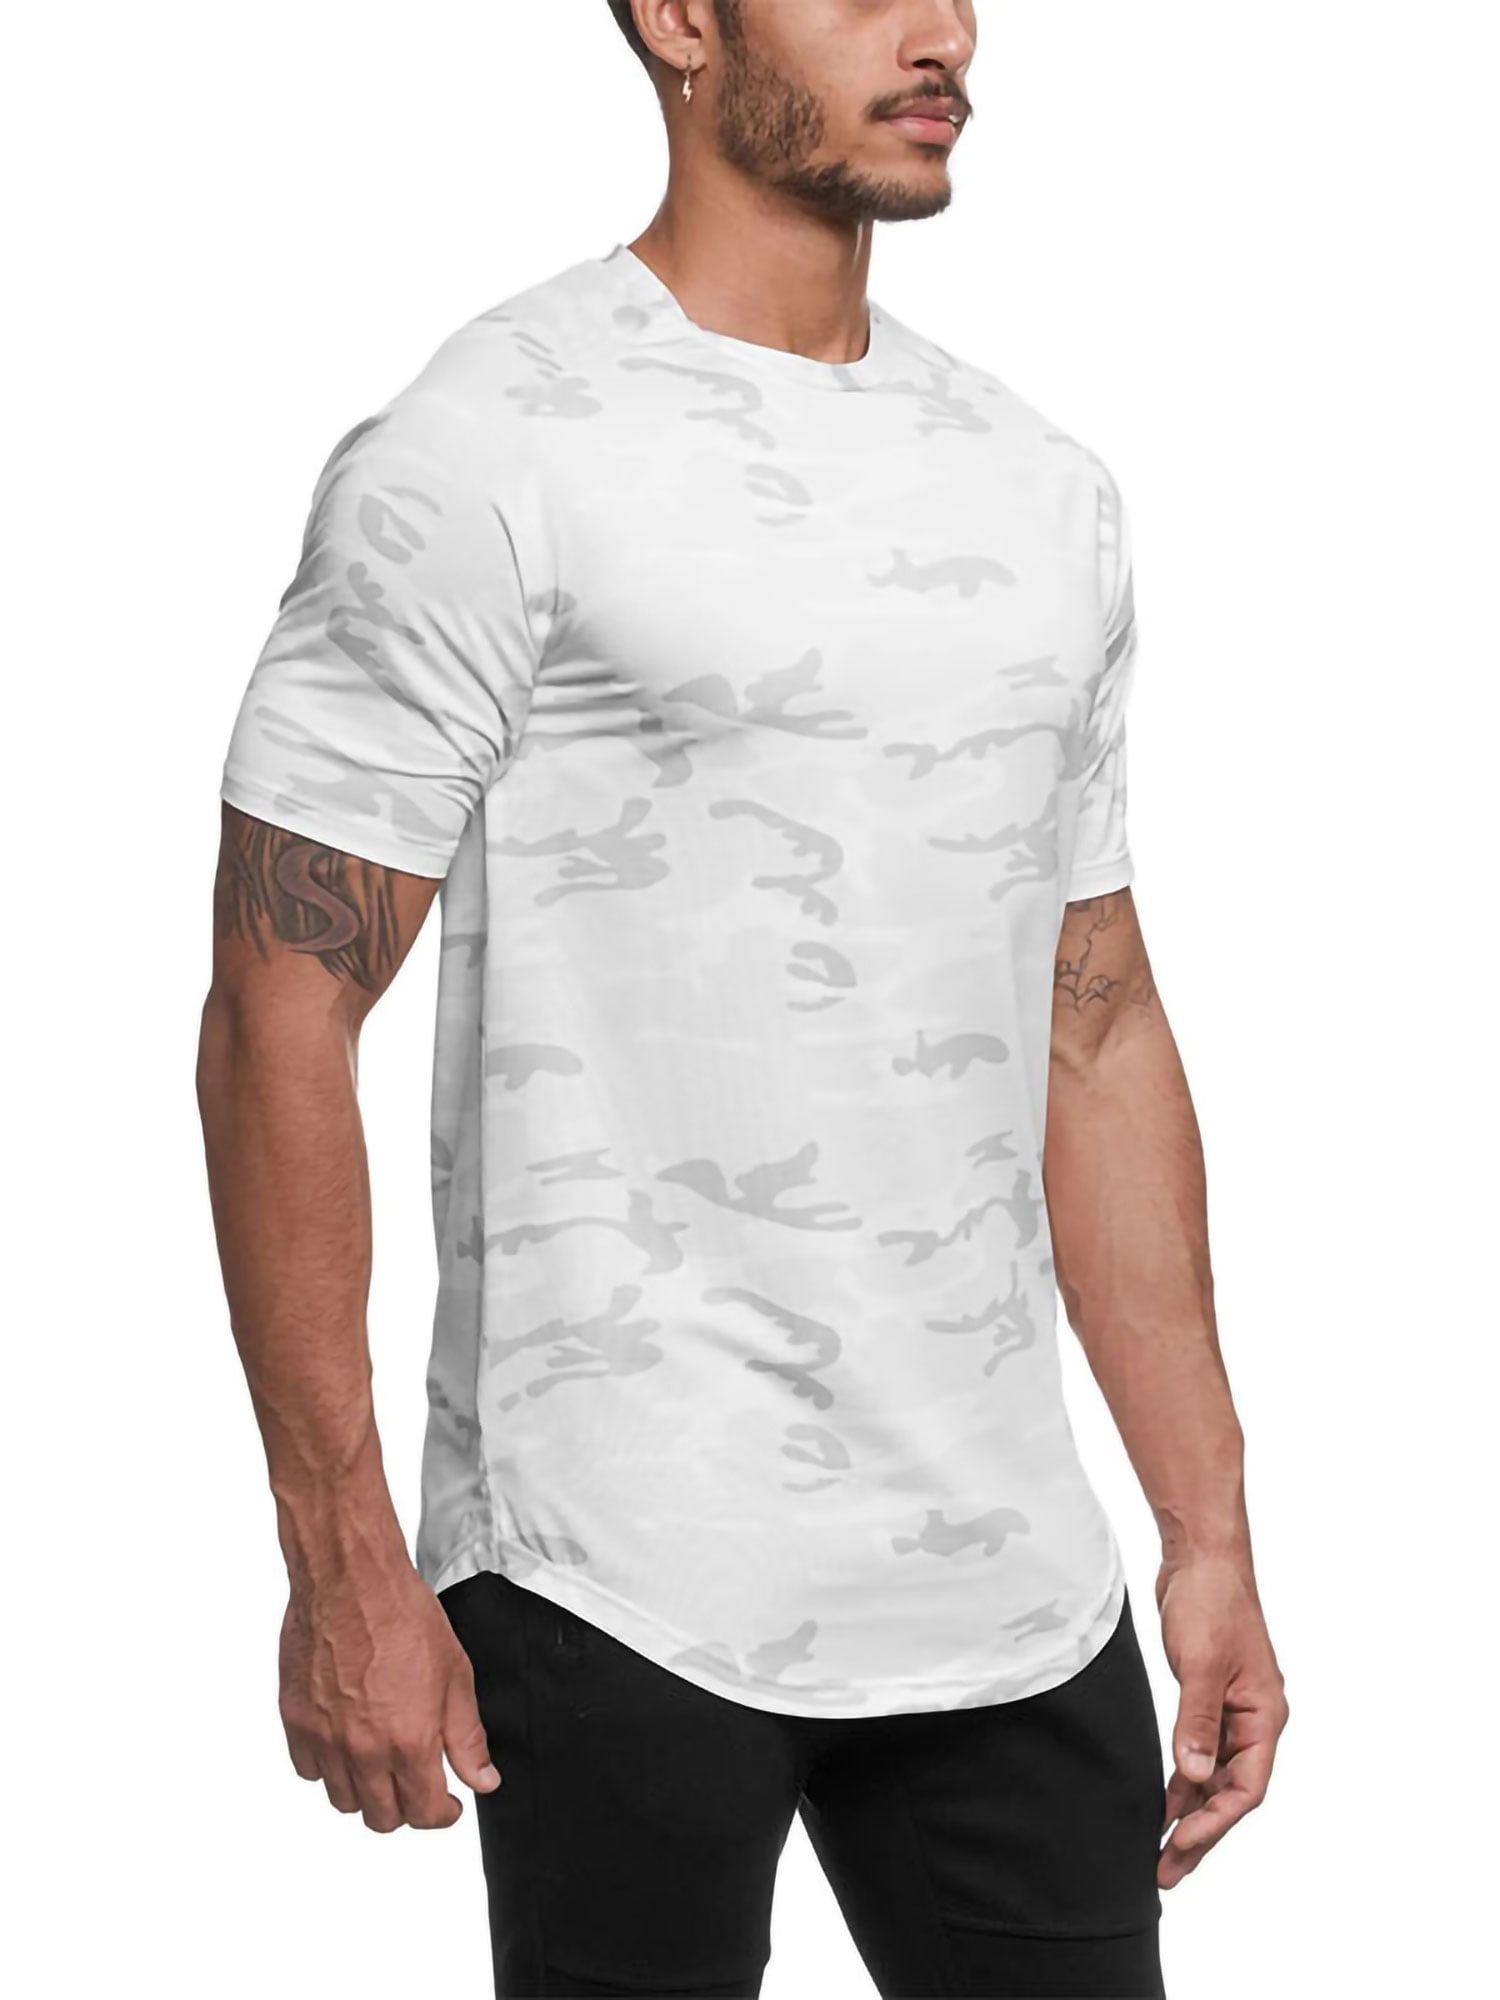 Details about   Men's Long Sleeve Camouflage Shirts Outdoor Training Gym Yoga Tops with Pocket 